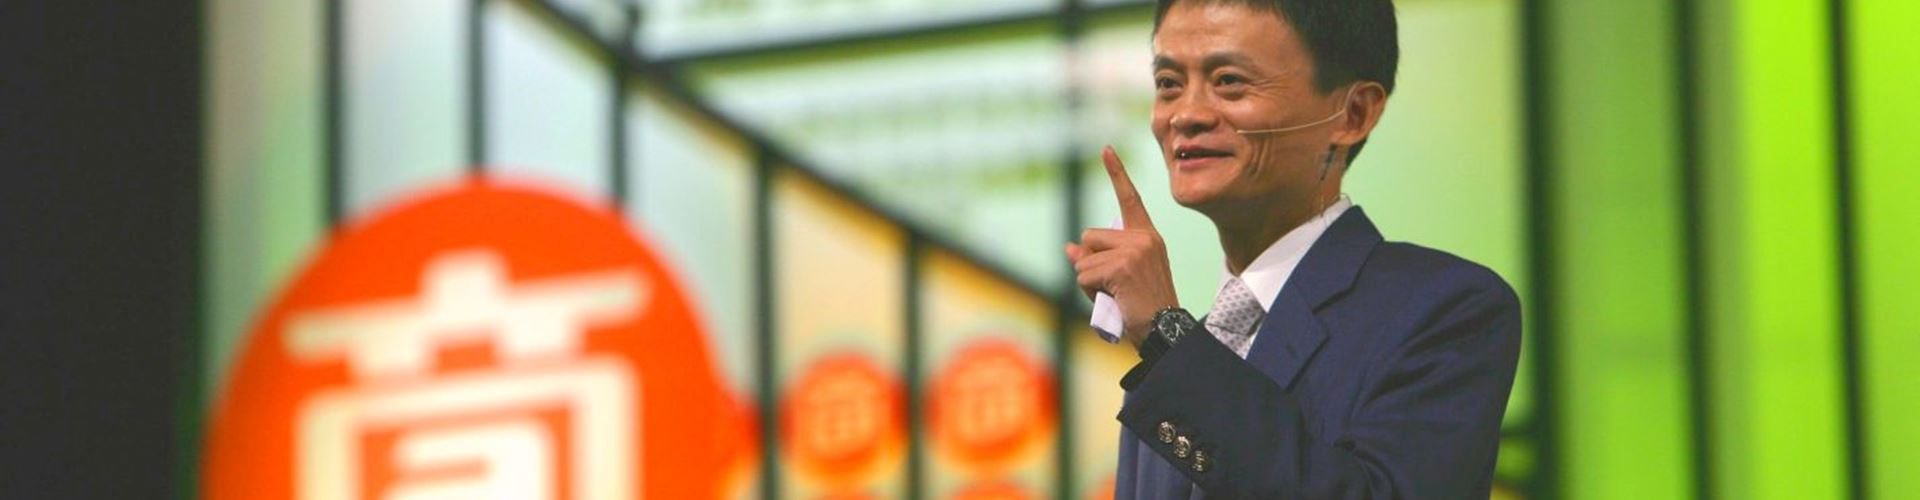 Alibaba ups share price ahead of highly anticipated IPO